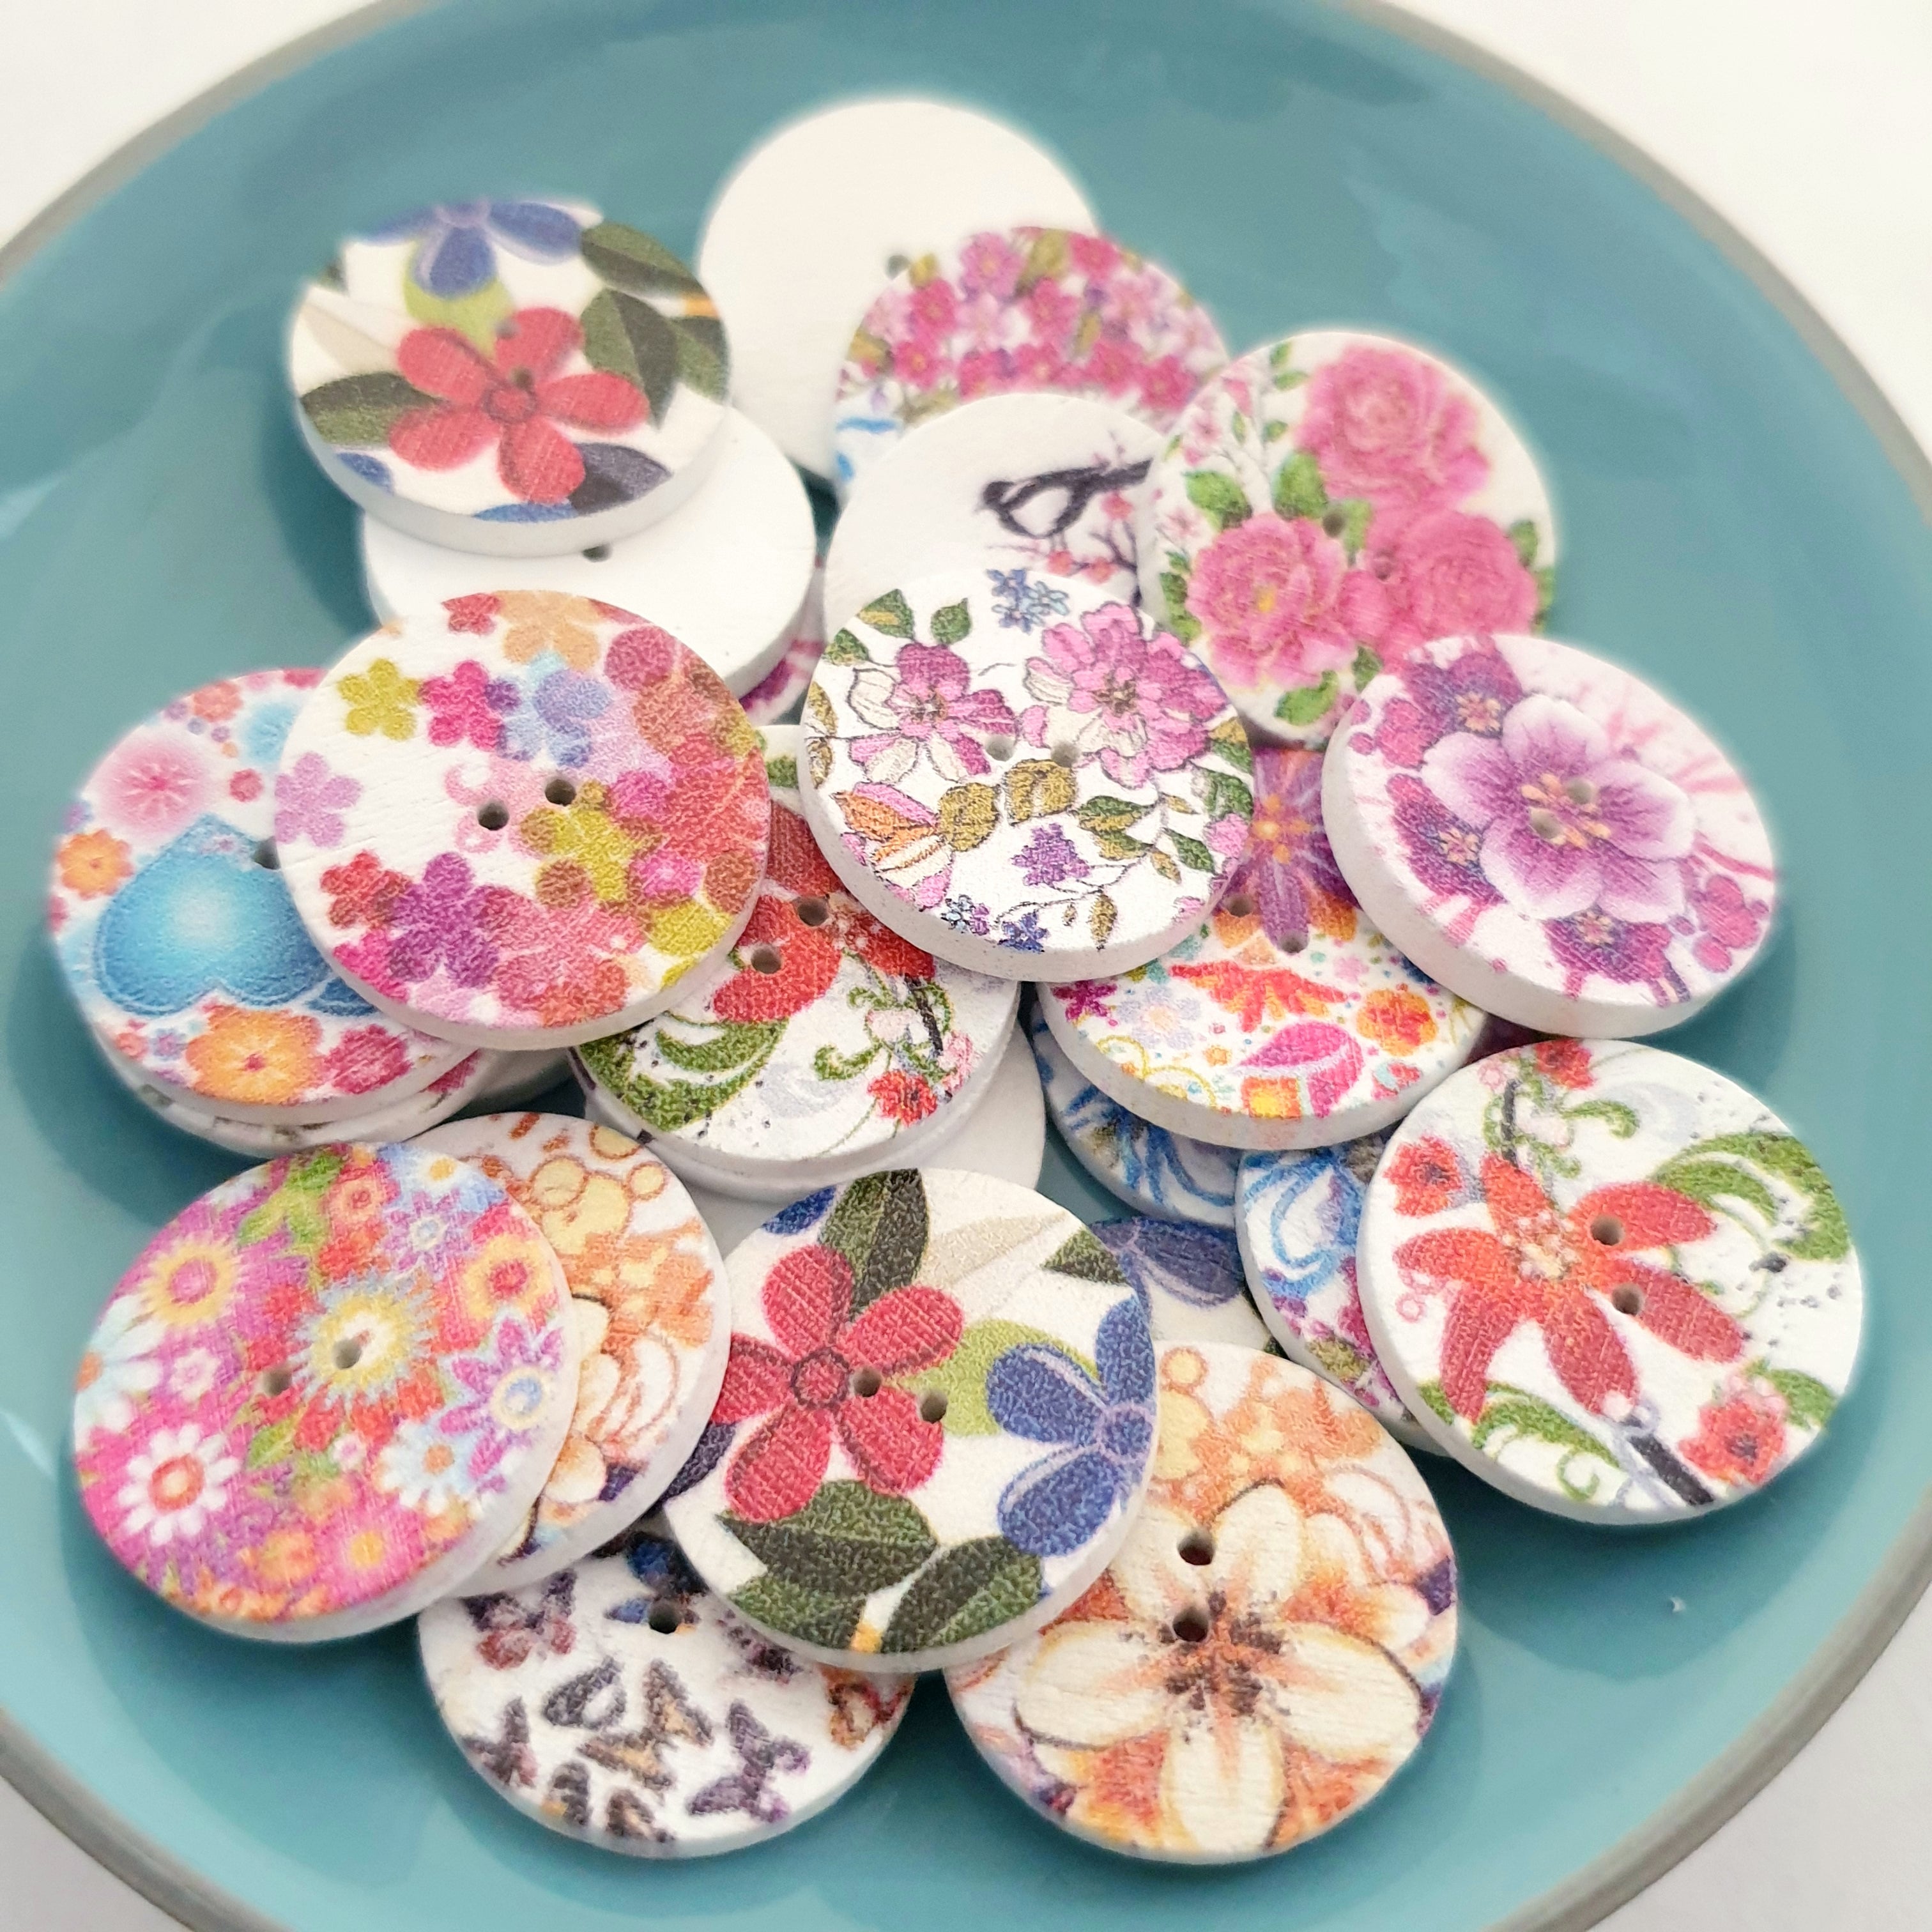 MajorCrafts 24pcs 20mm Random Mixed Flower Pattern 2 Holes Round Wooden Sewing Buttons